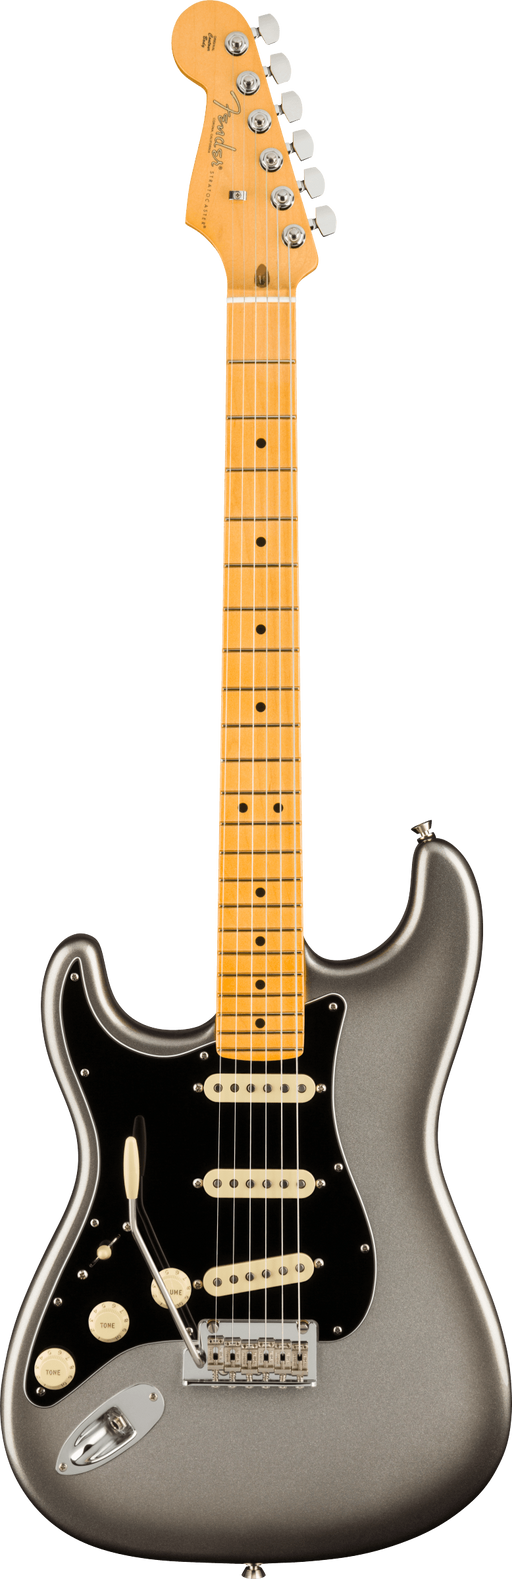 Fender American Professional II Stratocaster Left-Handed Mercury Electric Guitar